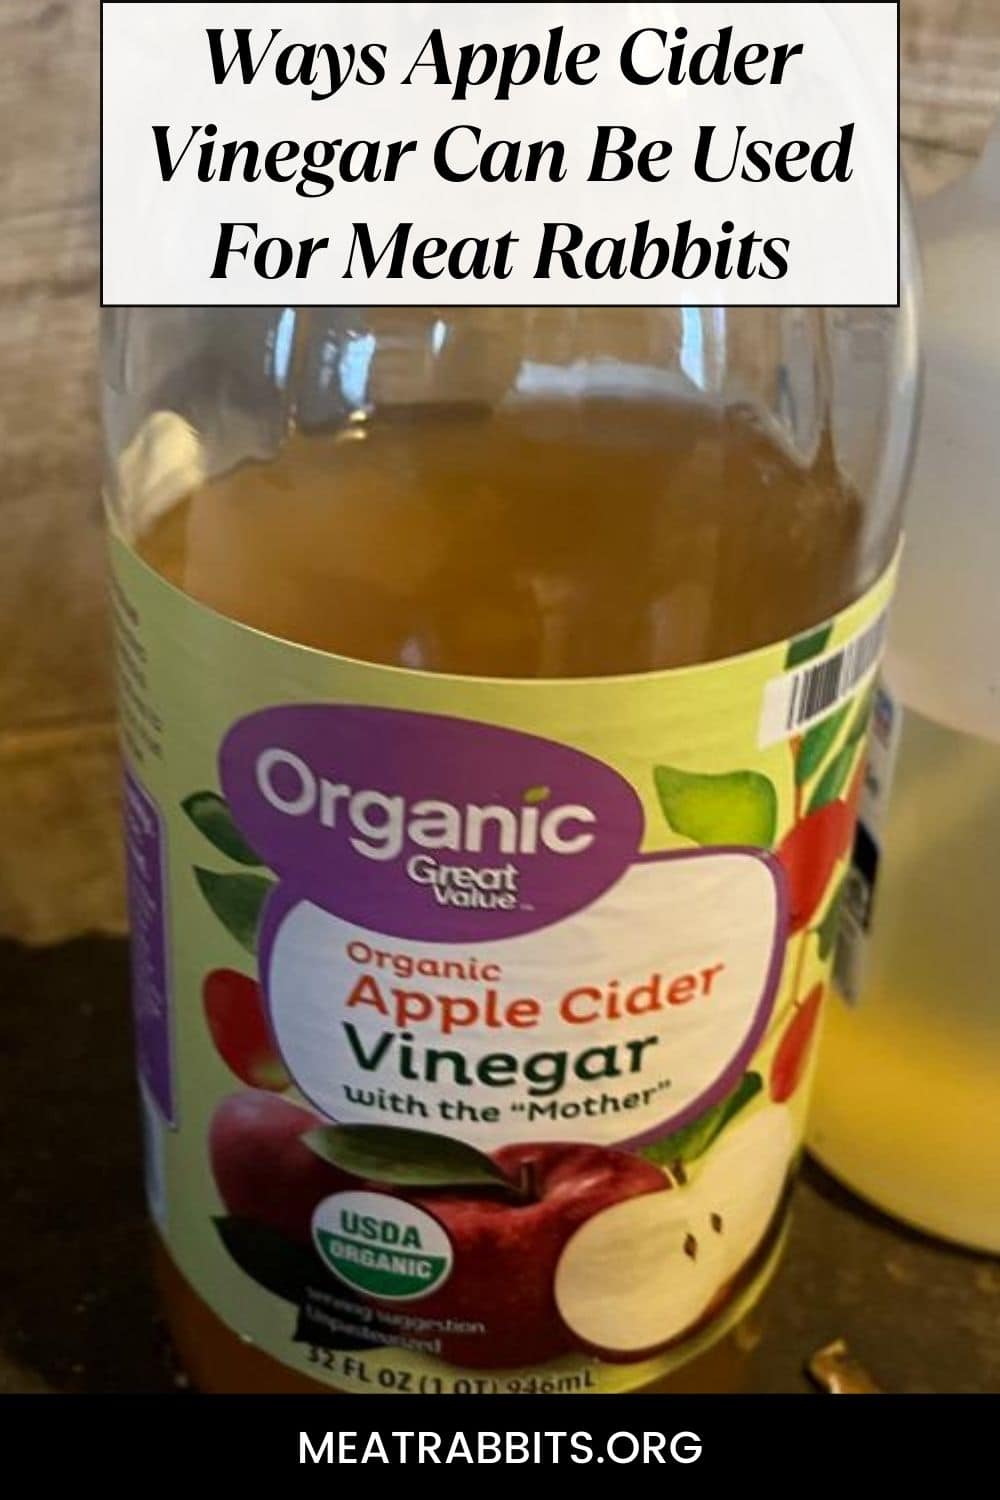 Ways Apple Cider Vinegar Can Be Used For Meat Rabbits pinterest image.